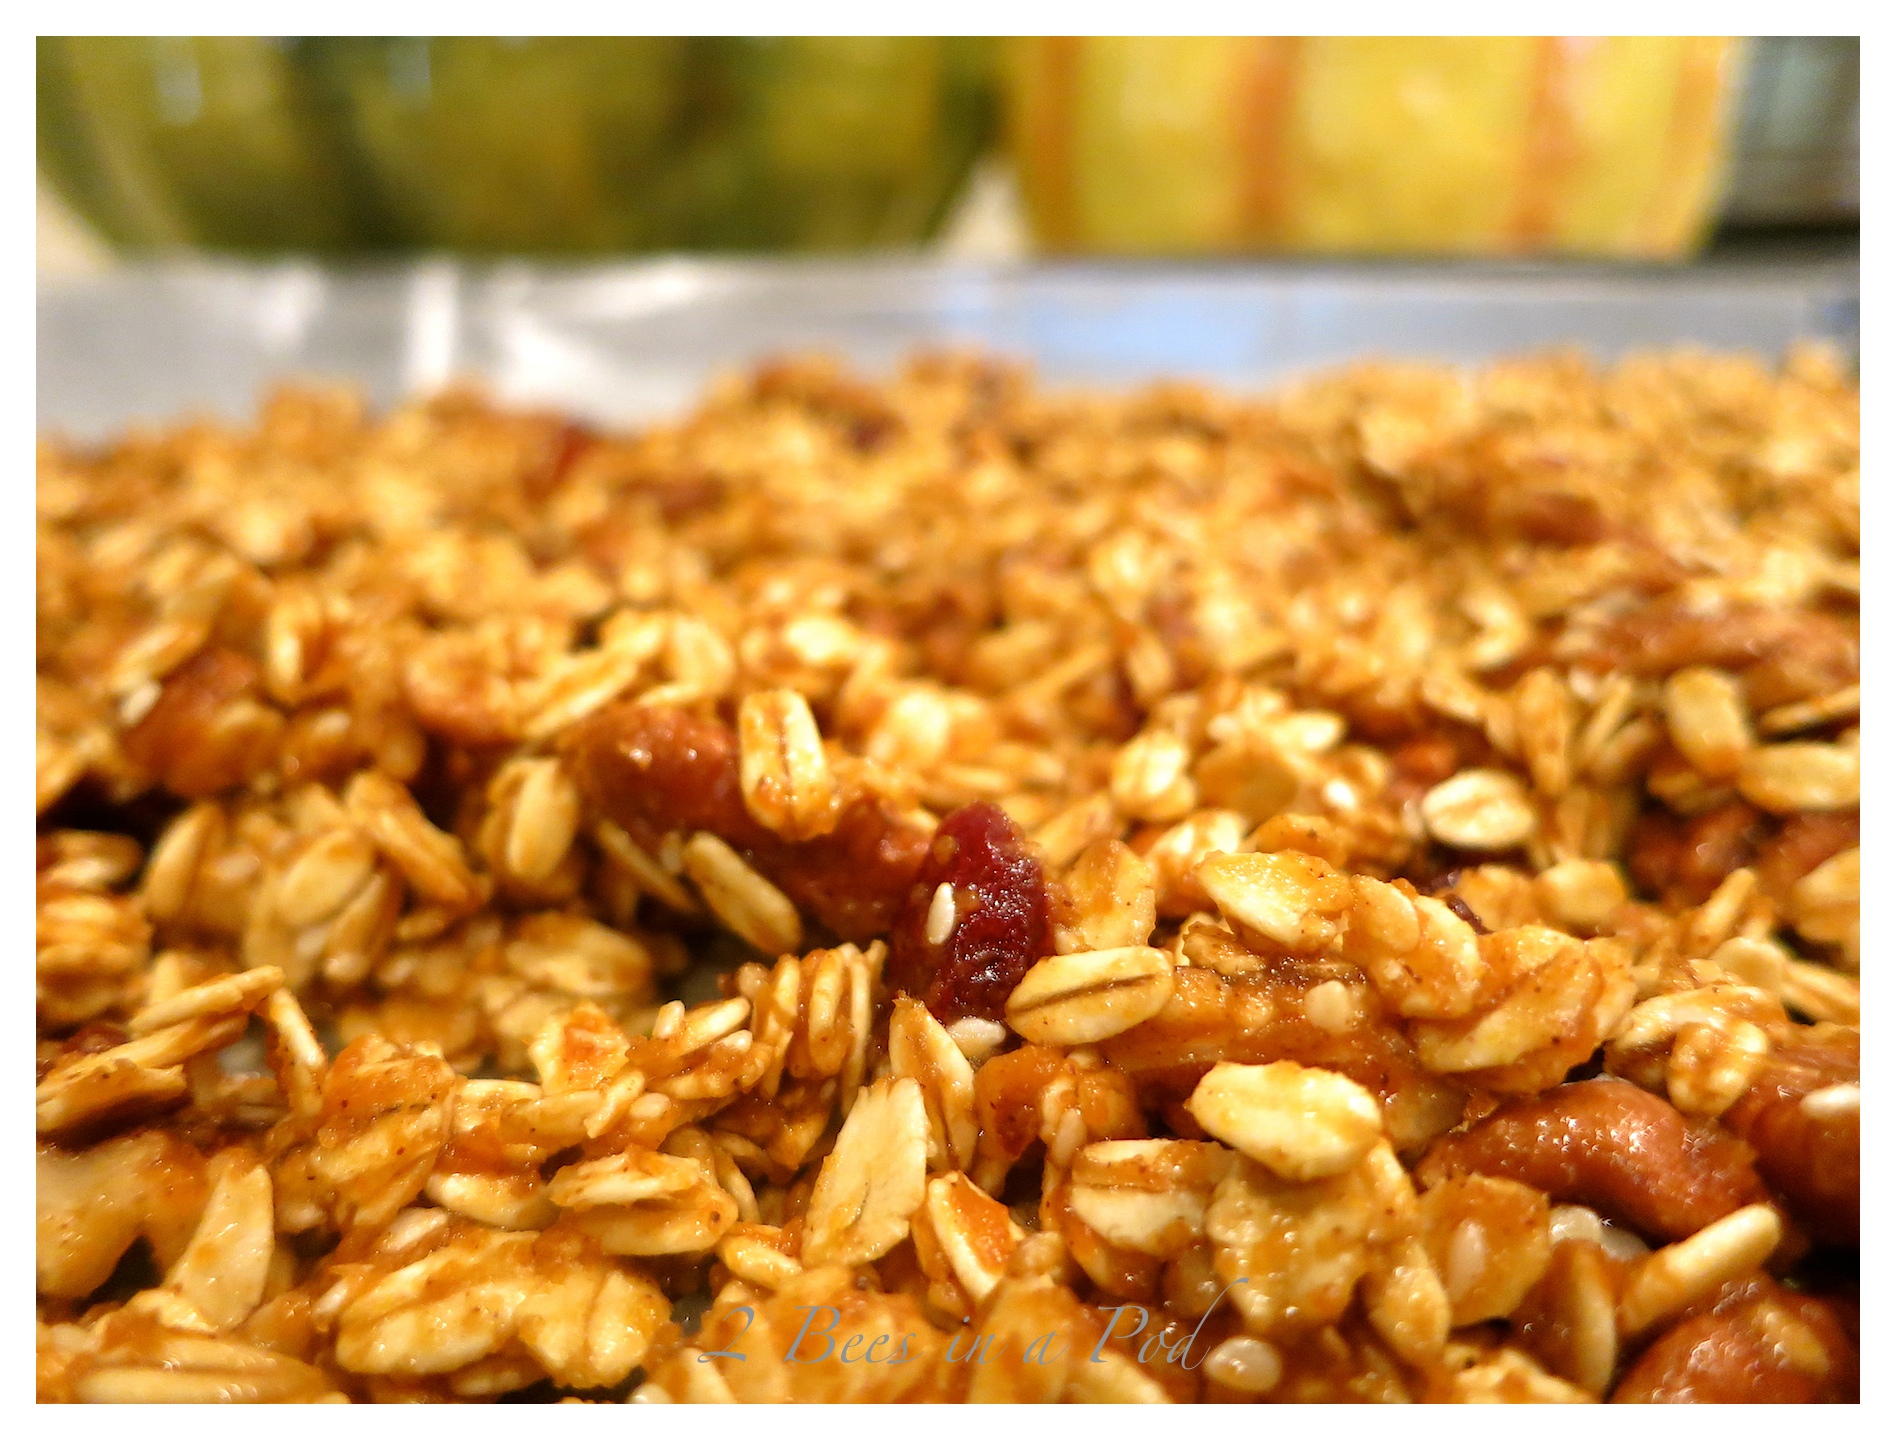 Southern Pecan Pumpkin Spice Granola - and it is Weight Watchers friendly!!